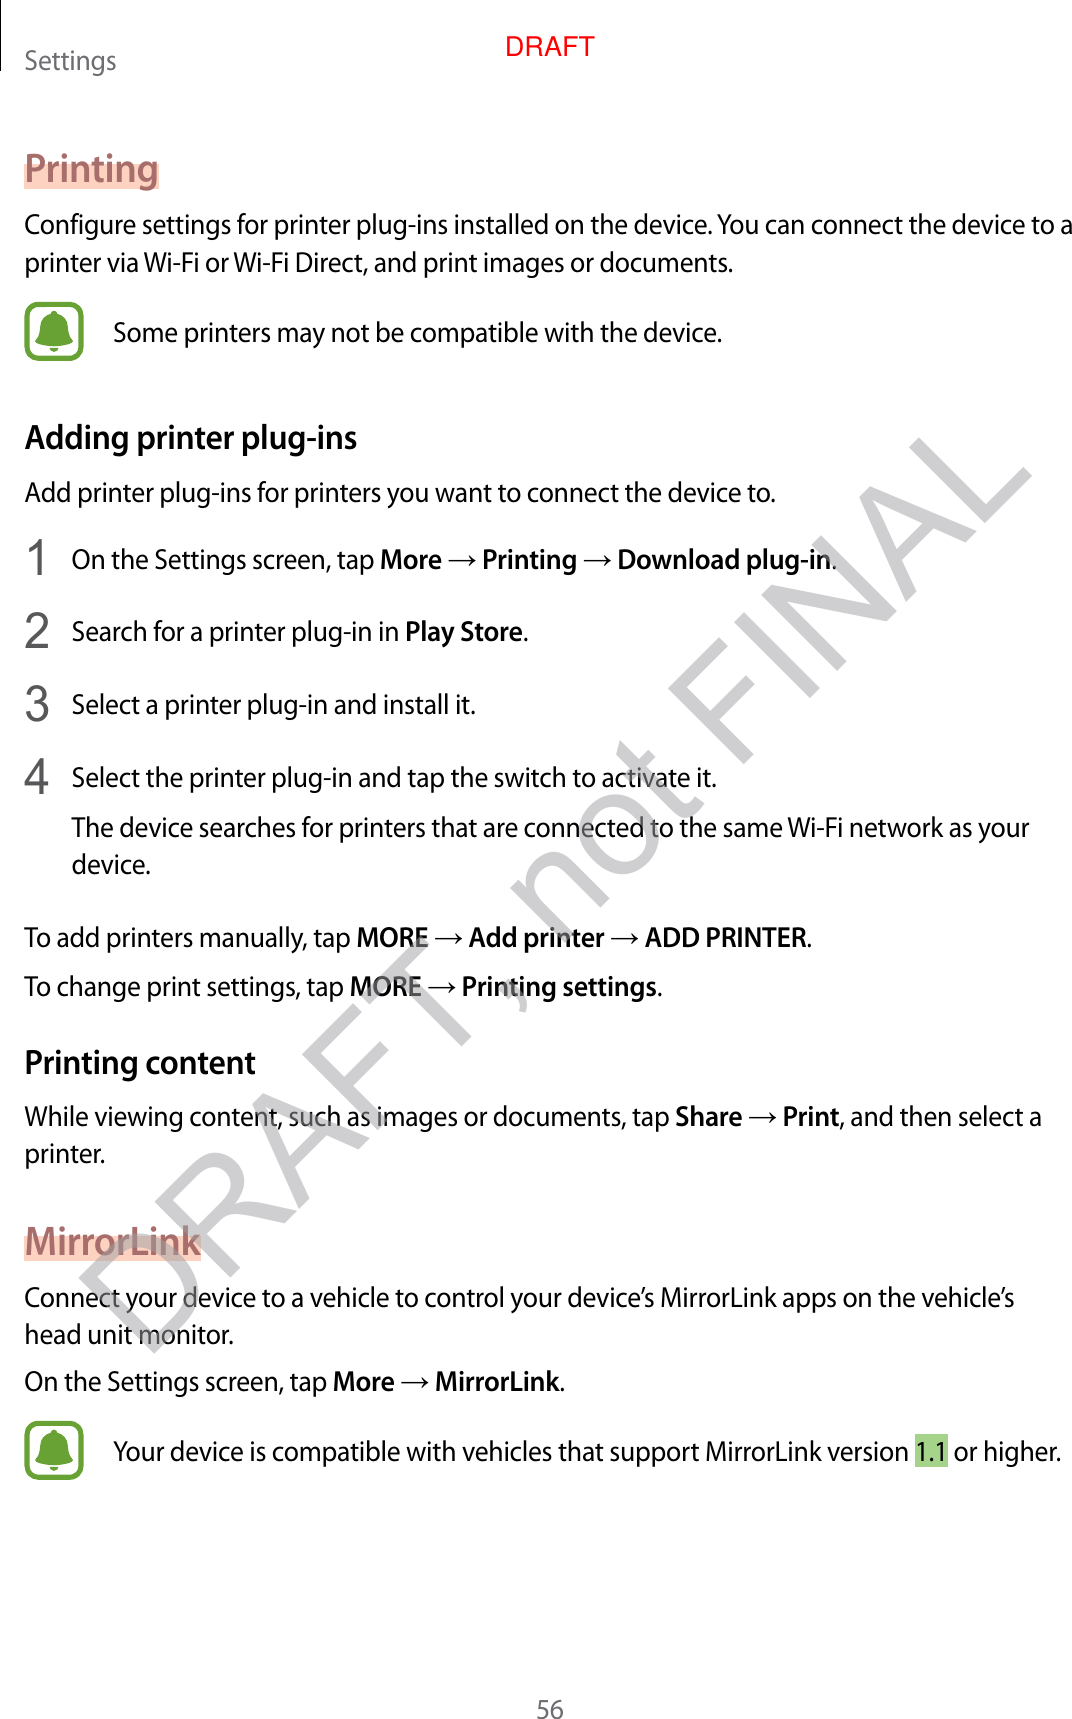 Settings56PrintingConfigure settings for printer plug-ins installed on the device. You can connect the device to a printer via Wi-Fi or Wi-Fi Direct, and print images or documents.Some printers may not be compatible with the device.Adding printer plug-insAdd printer plug-ins for printers you want to connect the device to.1  On the Settings screen, tap More → Printing → Download plug-in.2  Search for a printer plug-in in Play Store.3  Select a printer plug-in and install it.4  Select the printer plug-in and tap the switch to activate it.The device searches for printers that are connected to the same Wi-Fi network as your device.To add printers manually, tap MORE → Add printer → ADD PRINTER.To change print settings, tap MORE → Printing settings.Printing contentWhile viewing content, such as images or documents, tap Share → Print, and then select a printer.MirrorLinkConnect your device to a vehicle to control your device’s MirrorLink apps on the vehicle’s head unit monitor.On the Settings screen, tap More → MirrorLink.Your device is compatible with vehicles that support MirrorLink version 1.1 or higher.DRAFT, not FINALDRAFT